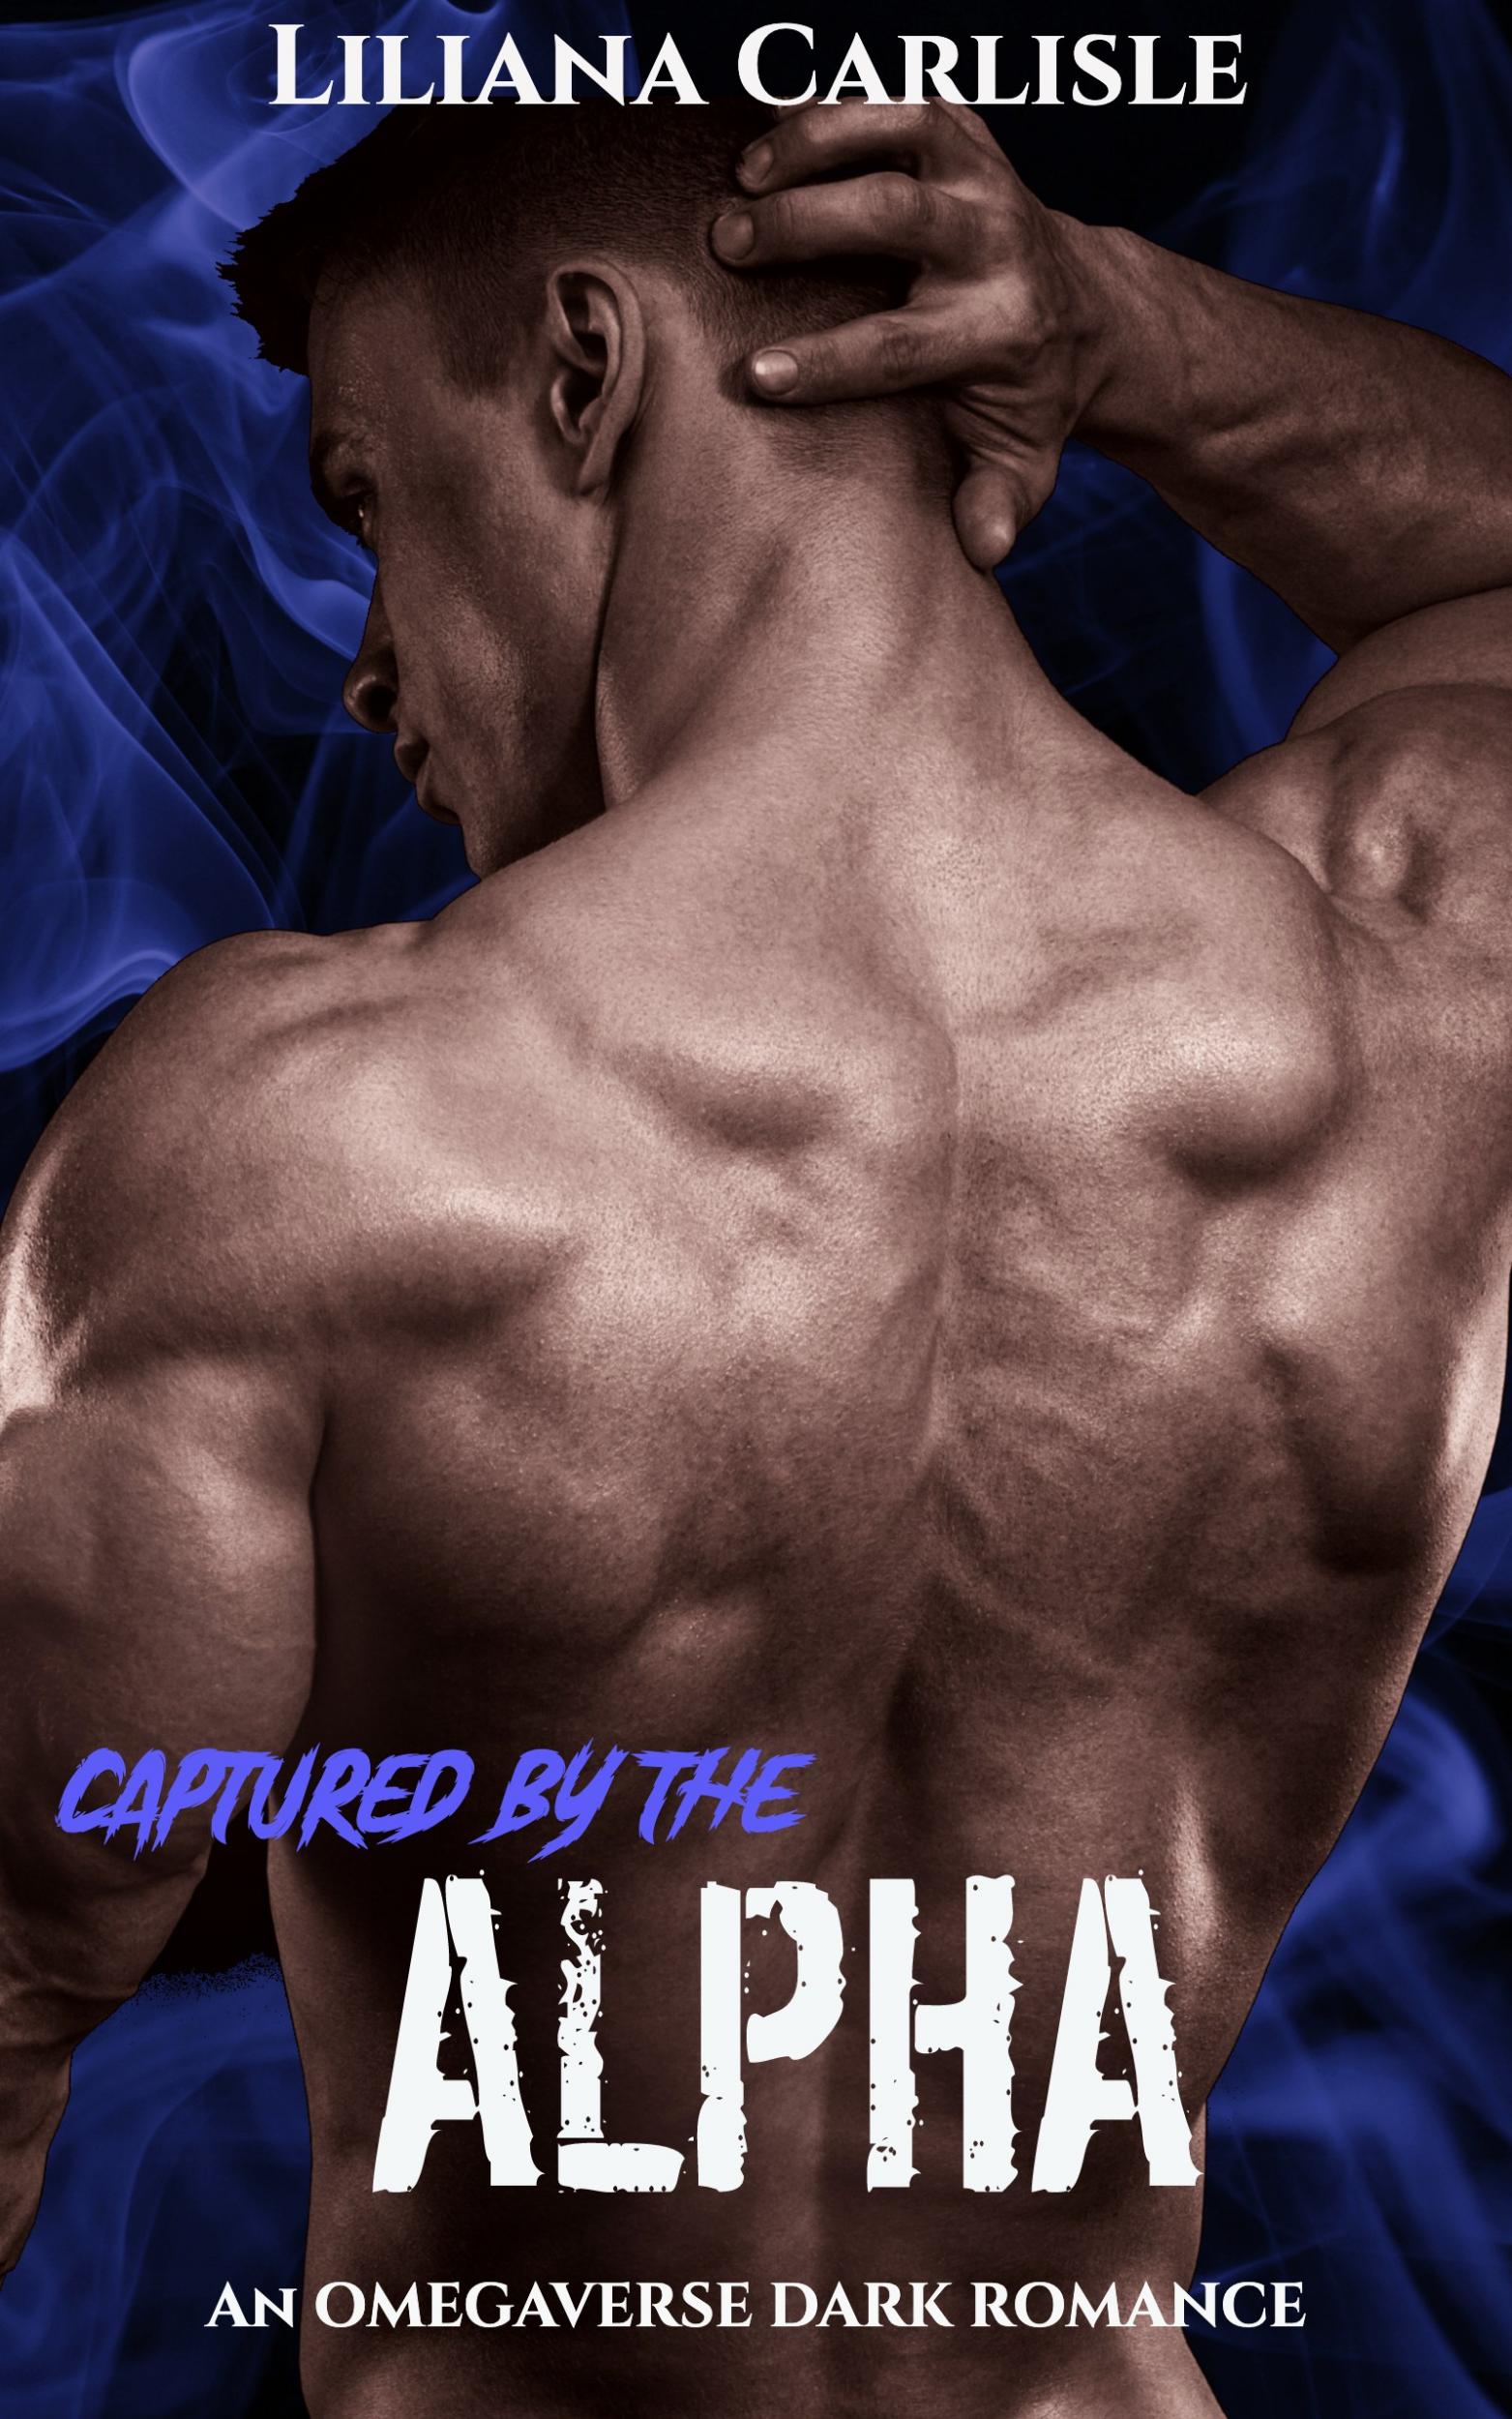 Get your free copy of Captured by the Alpha by Liliana Carlisle